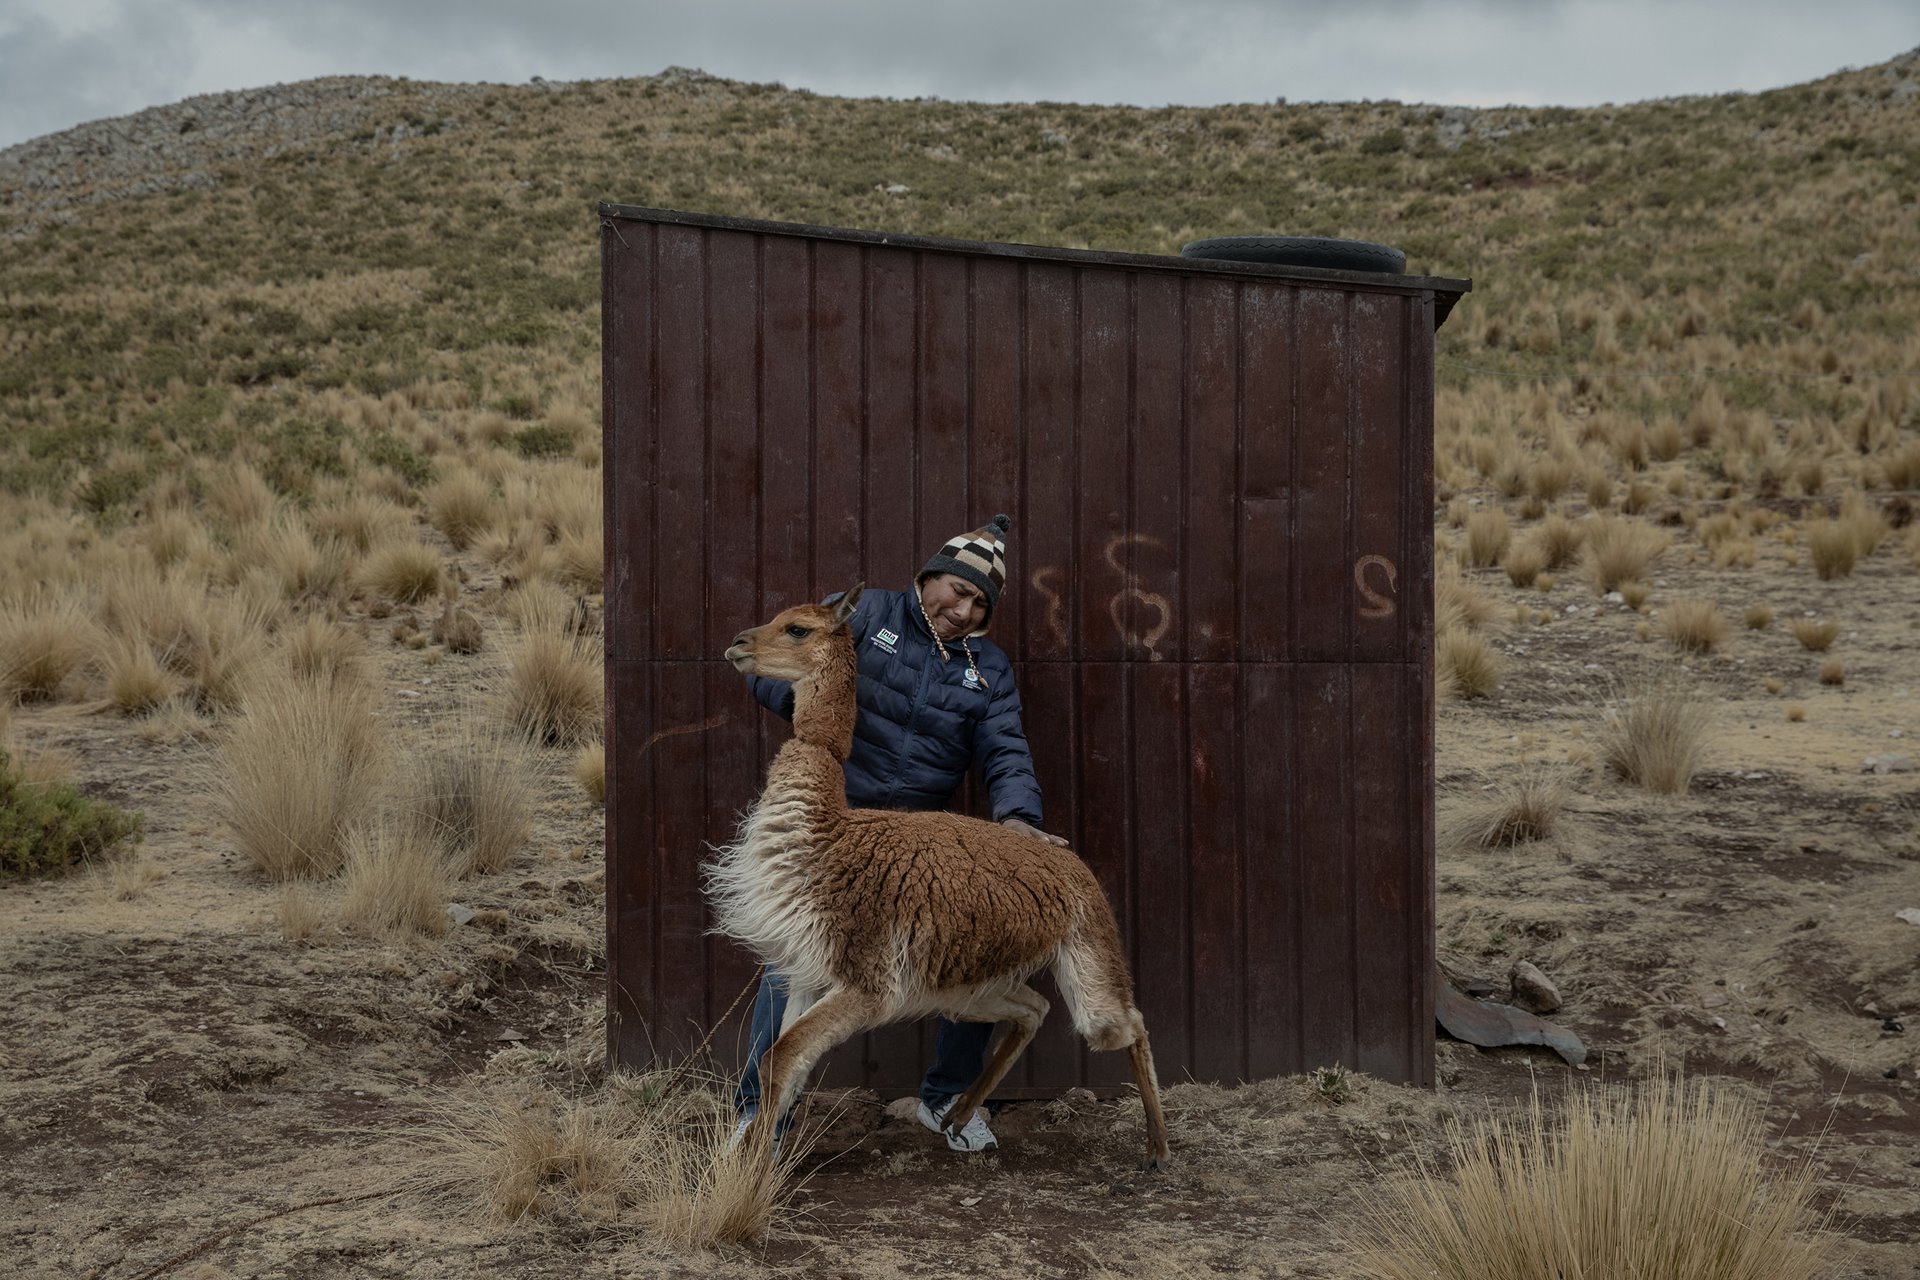 Felimon Paxi Menezes, a researcher at the Quimsachata Research and Production Center, in Puno, Peru, handles a pacovicuña. A cross between an alpaca and a vicuña (a camelid renowned for its hair), pacovicuñas display high resistance to cold and have more valuable wool.